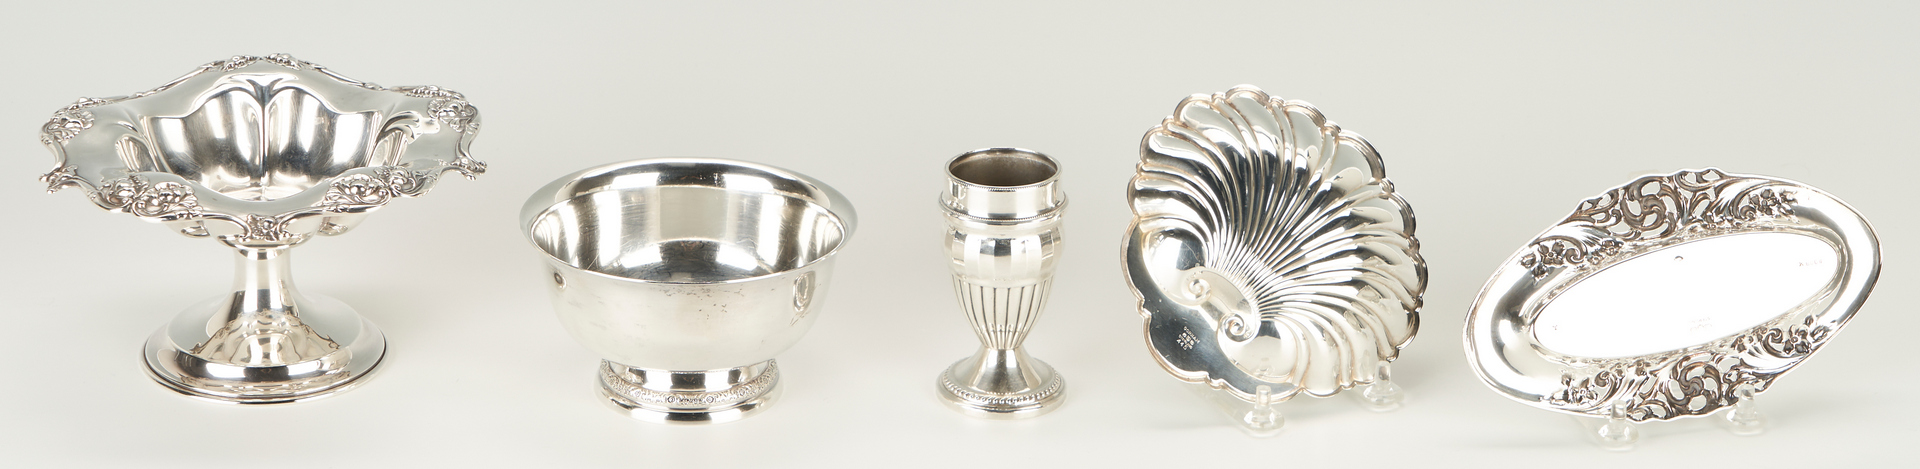 Lot 1249: 15 pcs sterling silver incl. candy bowls, flatware